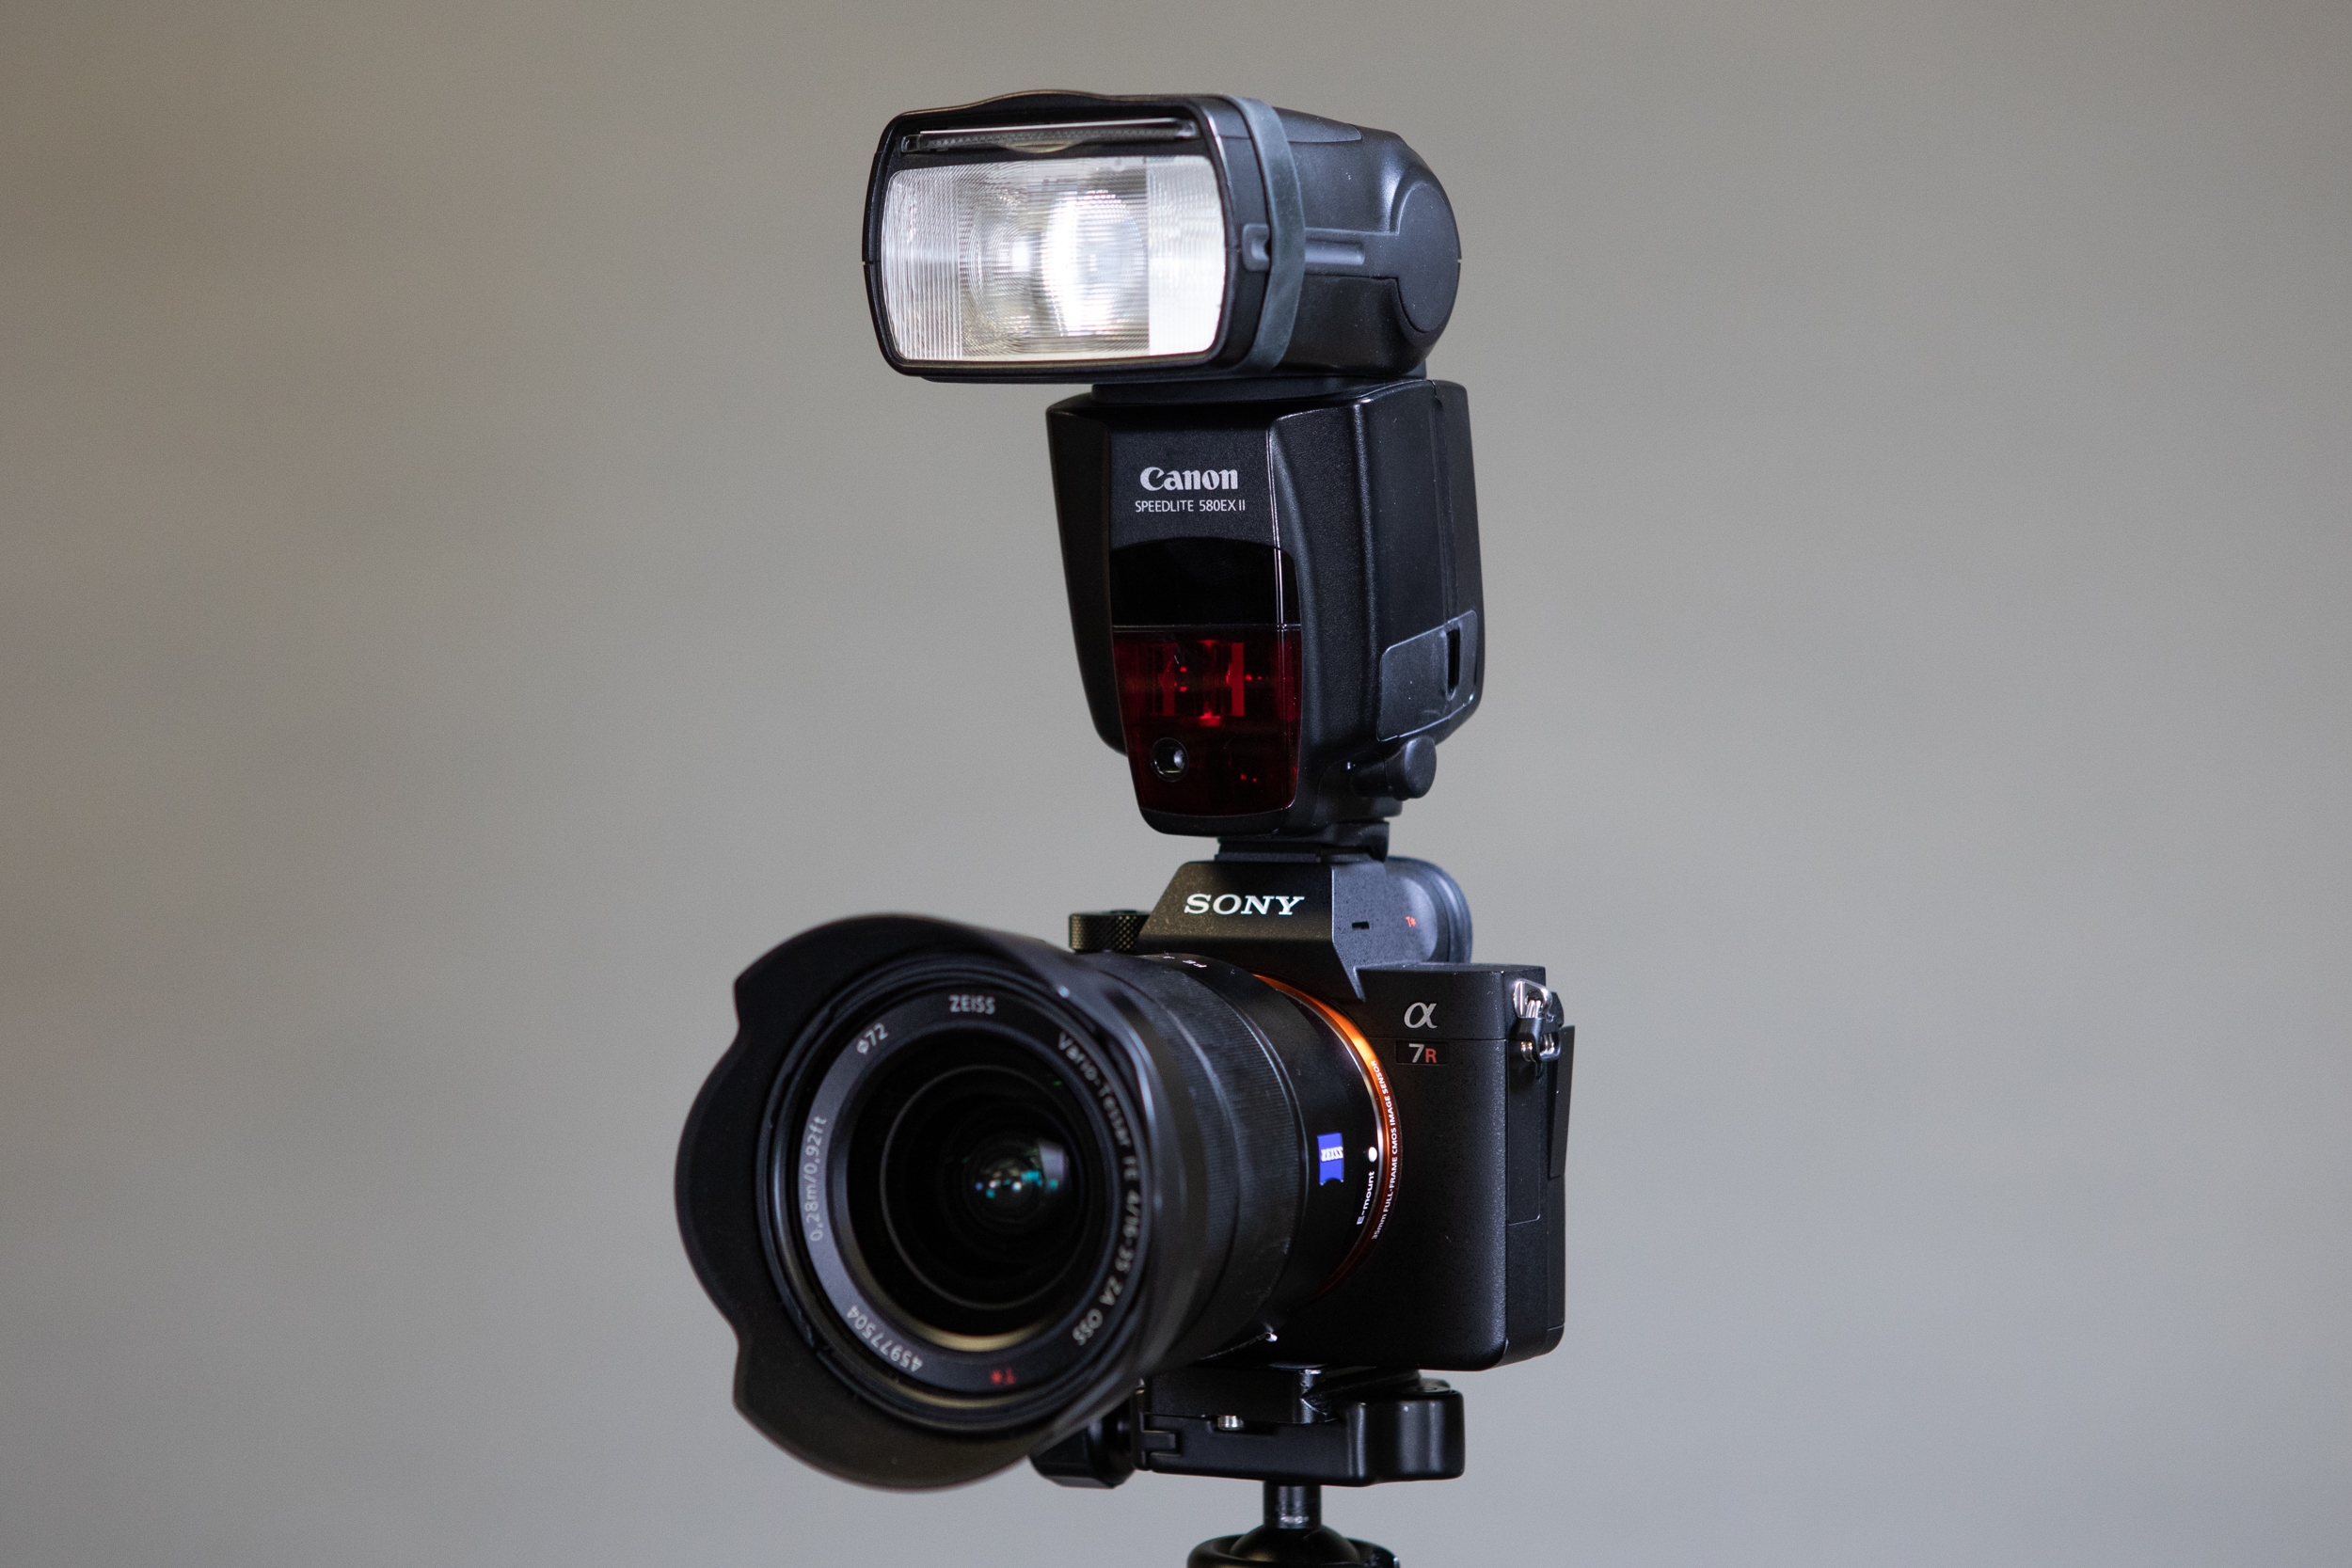 Using a Canon Speedlite Flash with a Sony A7R III